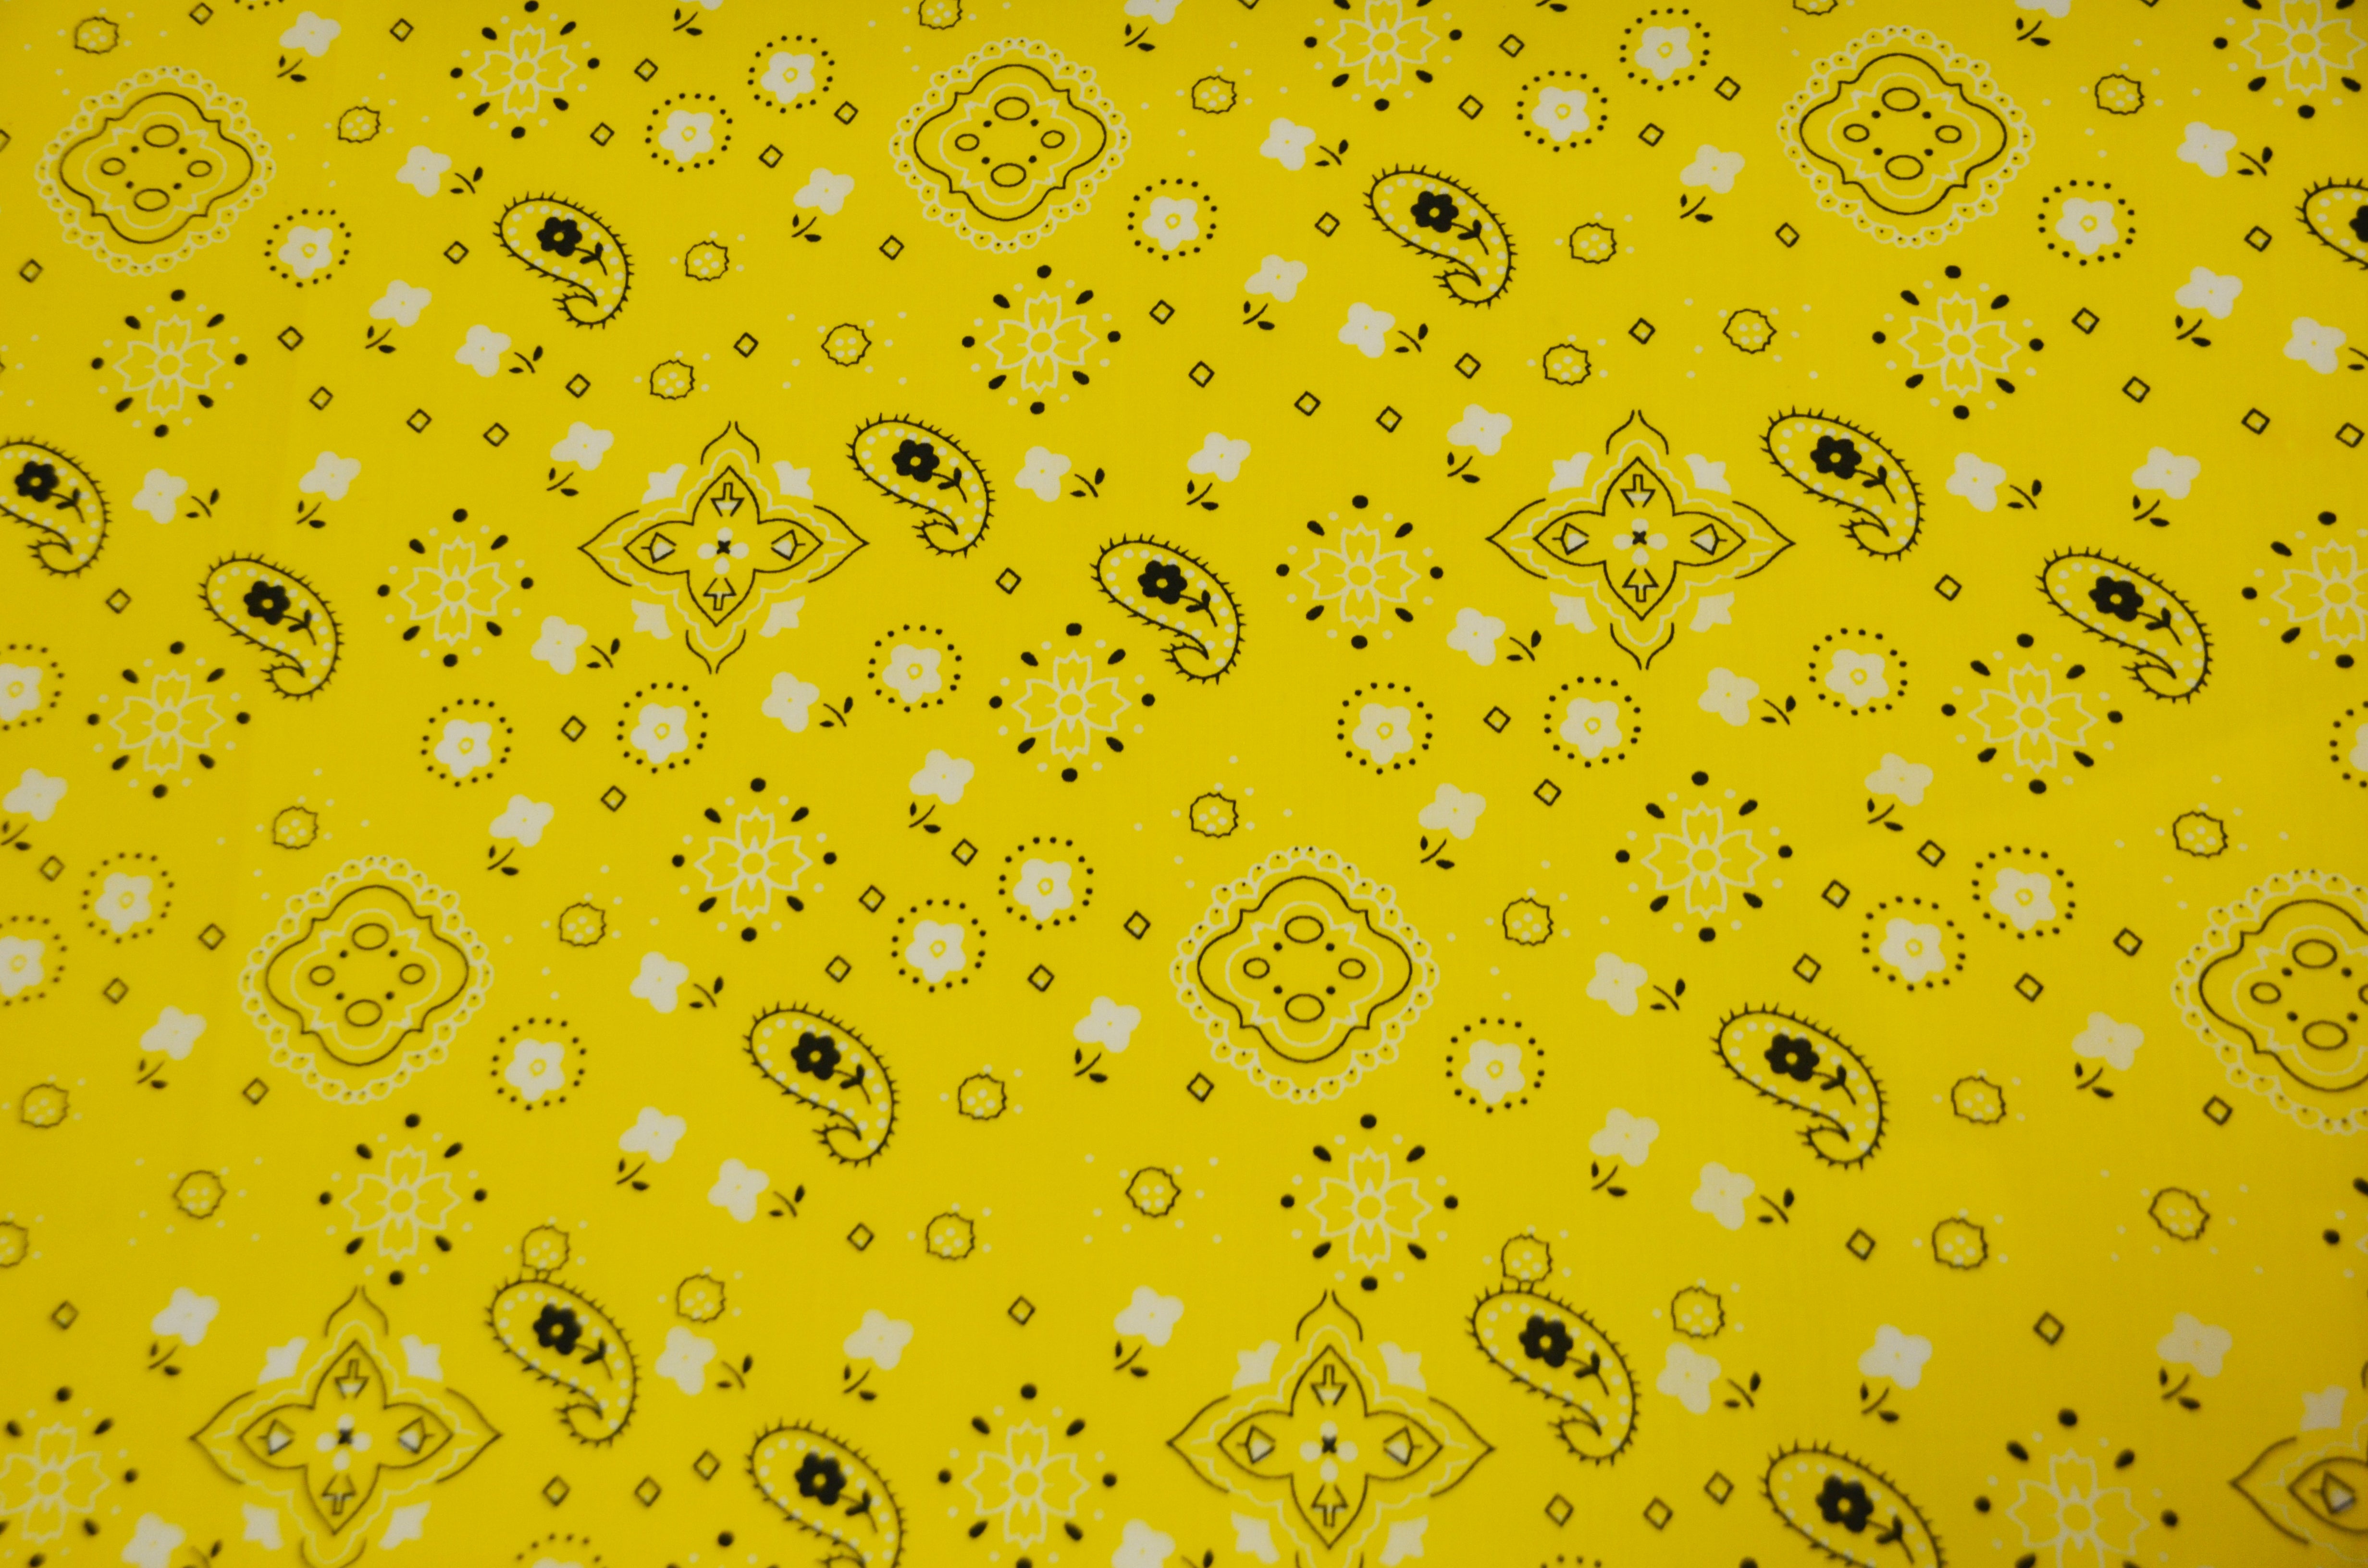 Bandana Cotton Print. Bandanna Fabric 60 Wide. Multiple Colors. Products Products Products 0426YELLOW Products Navy_151b1662 3D78 489b 98e0 Products